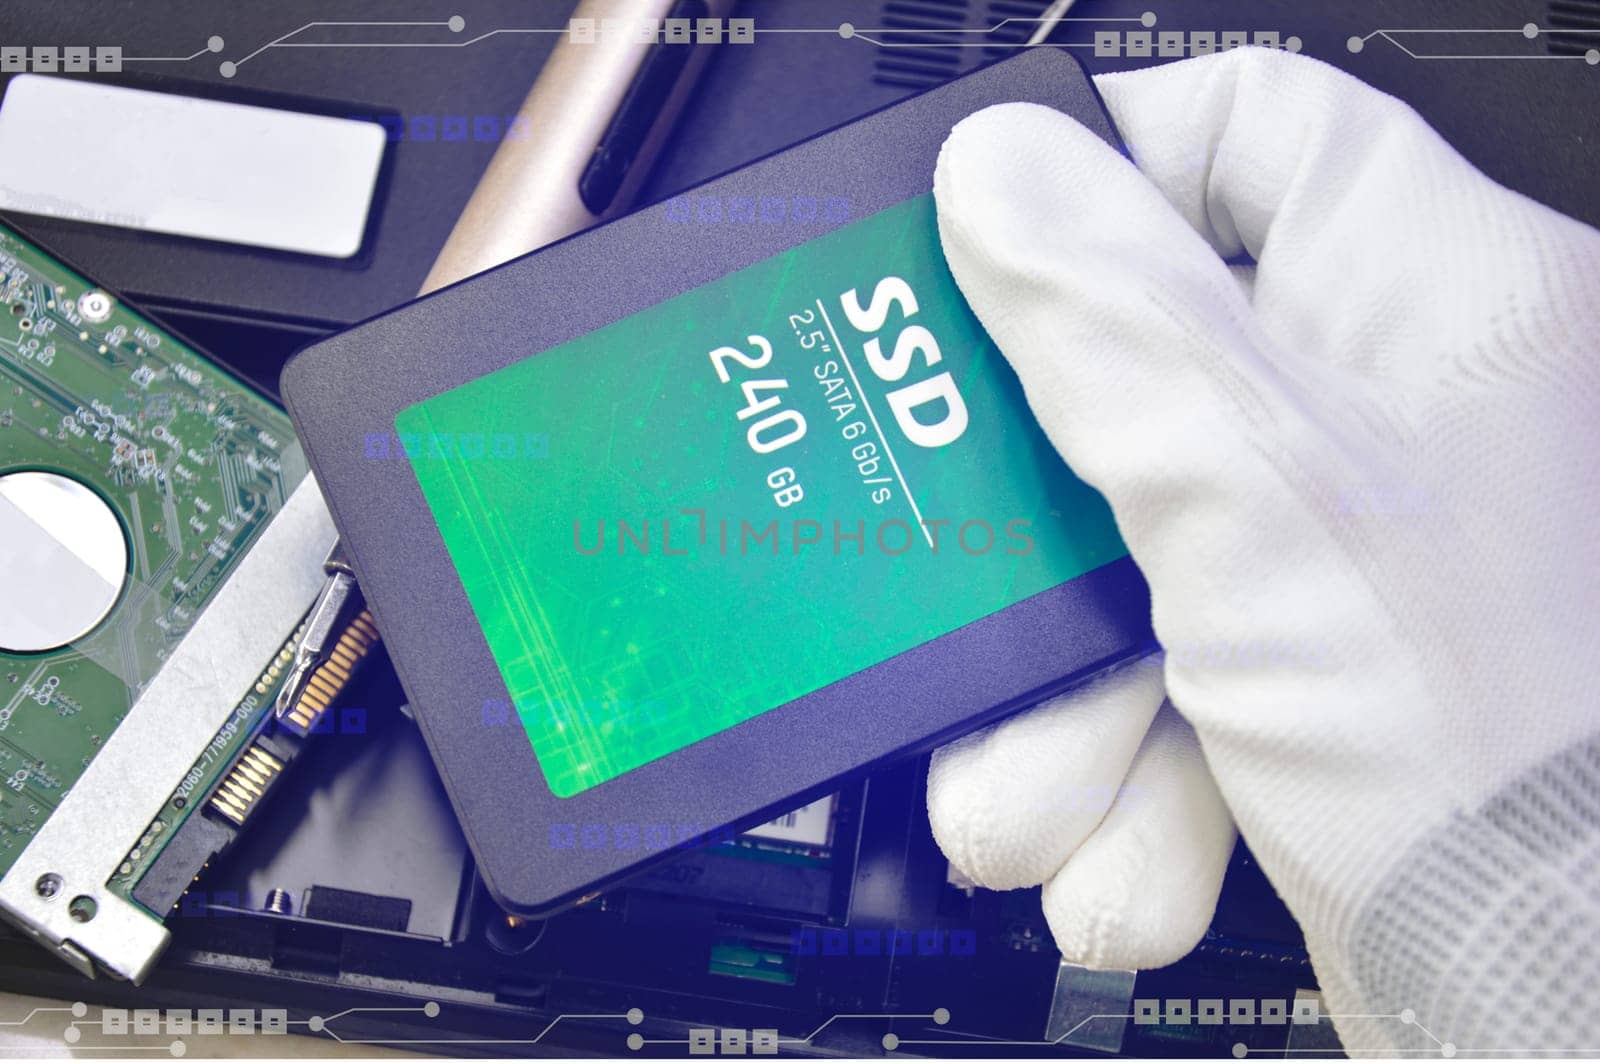 2.5-inch SSD hard disk drives are used to store data, also known as hard disk drives. It is currently being used at a very high rate.